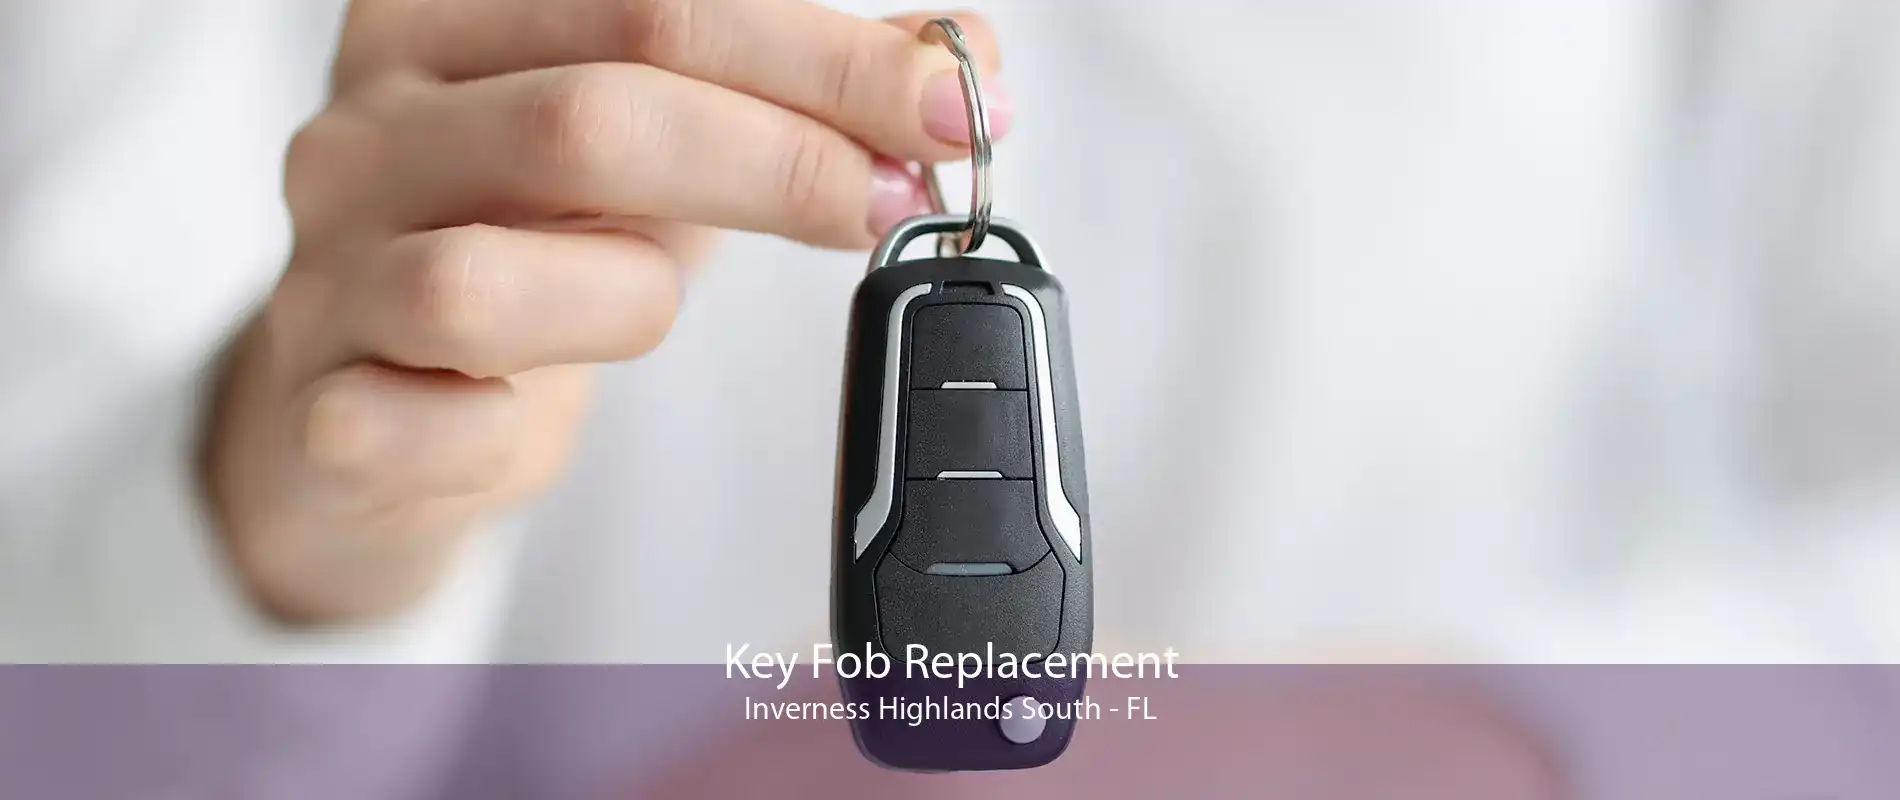 Key Fob Replacement Inverness Highlands South - FL